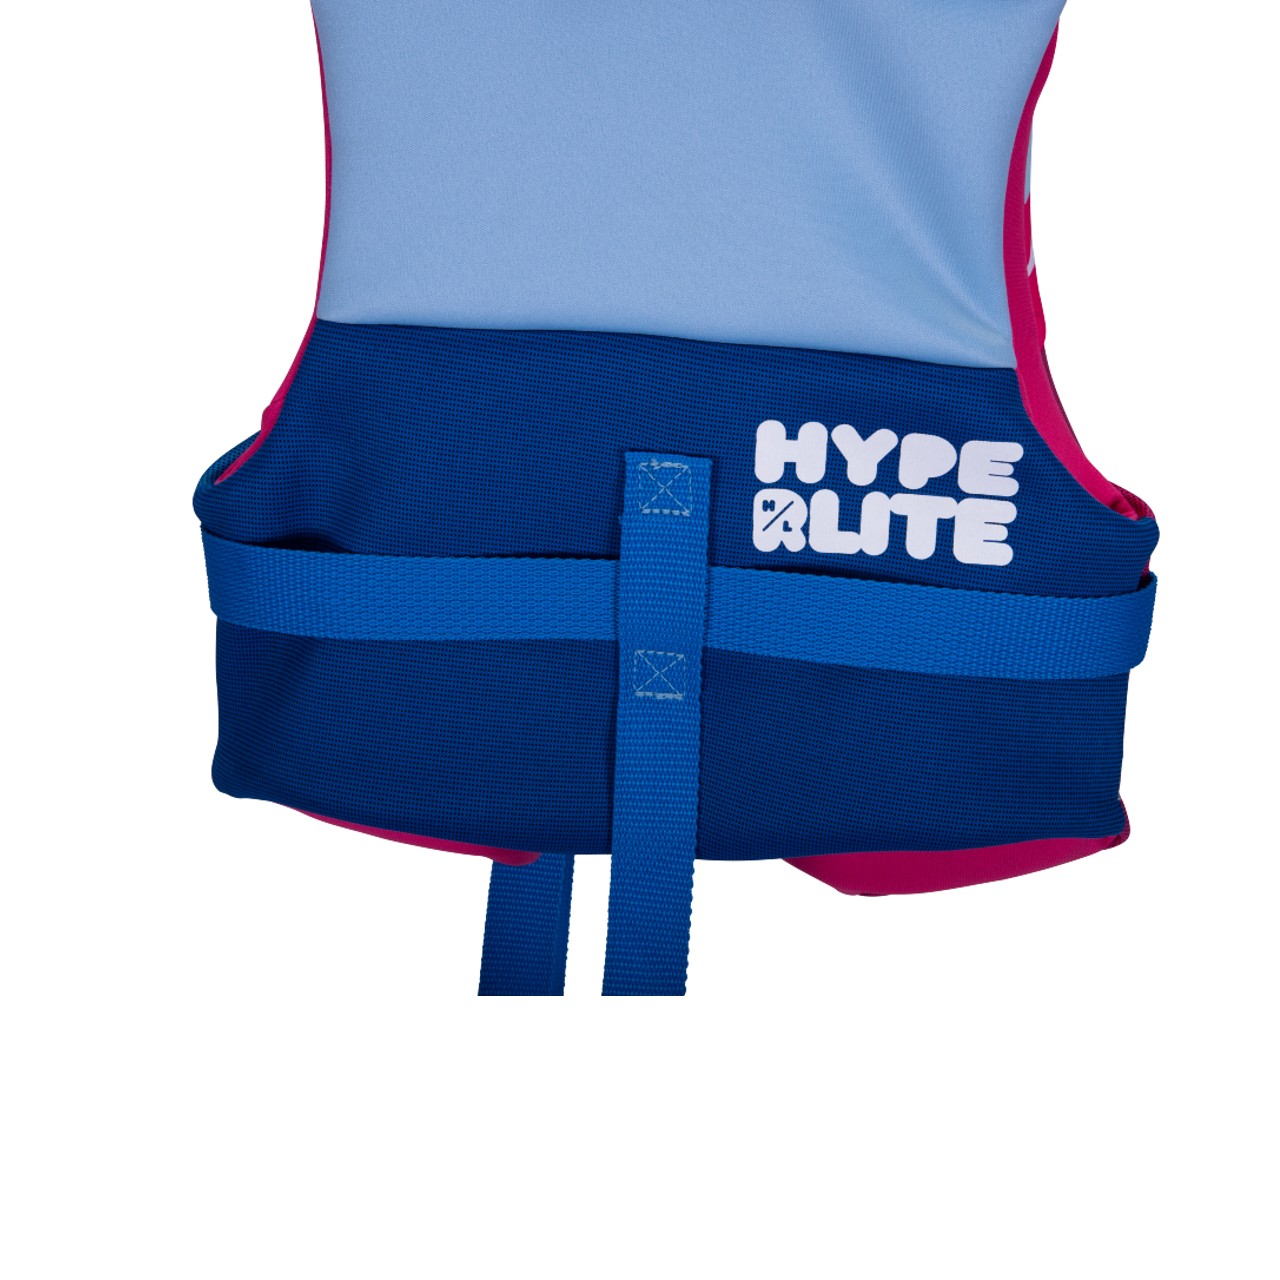 Hyperlit Indy Girls Toddle Life Jacket - 88 Gear